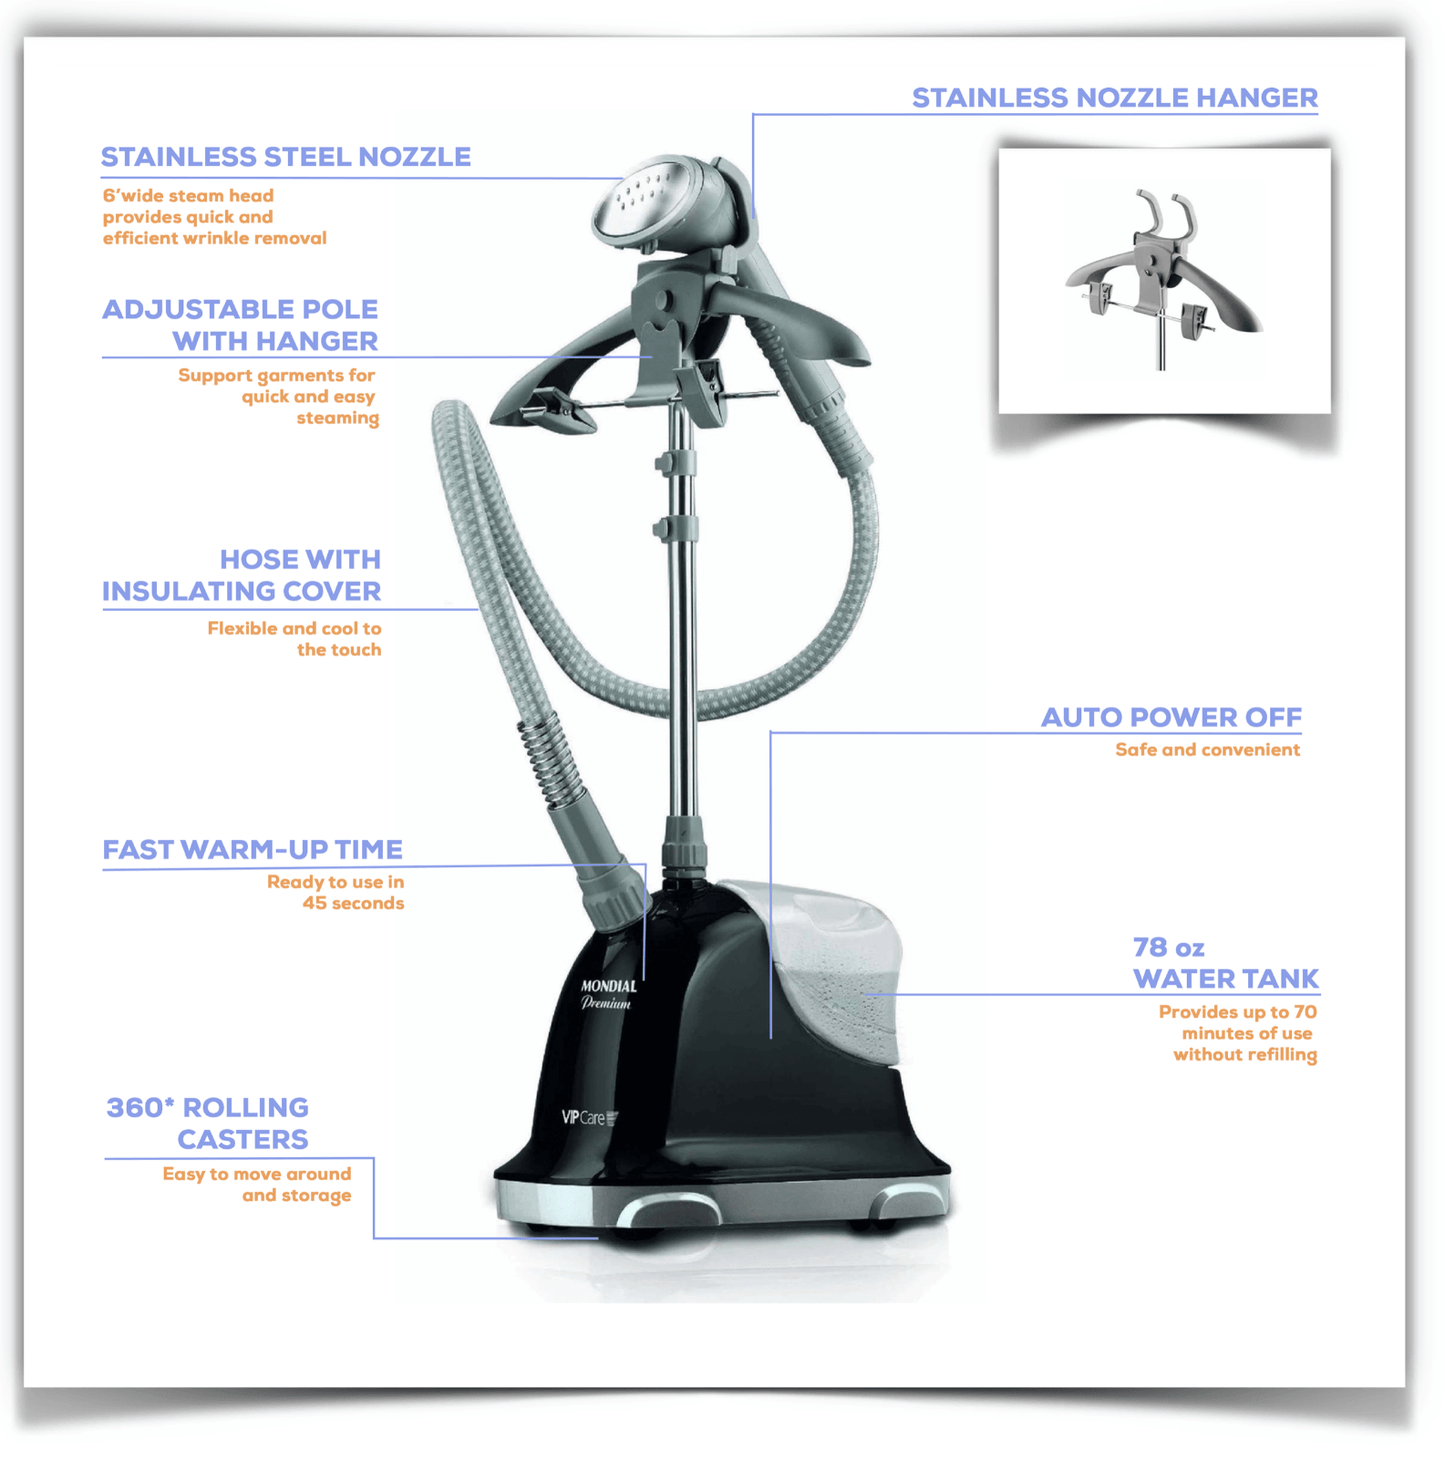 Improved Mondial VP.04 - 1500W Standing Garment Steamer For Clothes, The Professional Iron Cloth Steamer